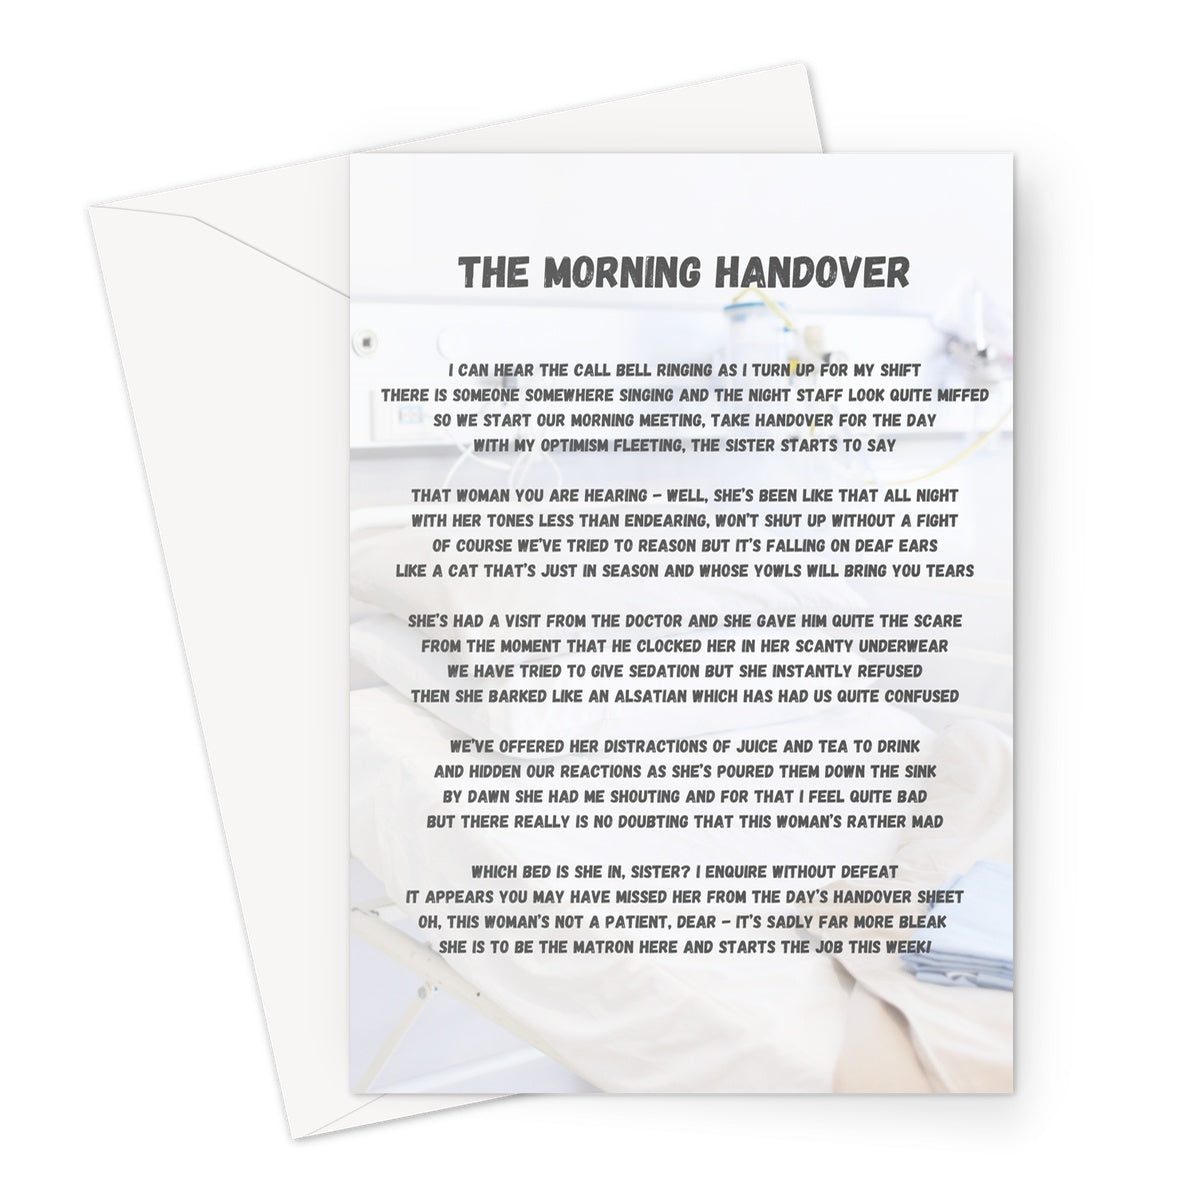 Blank greeting card with an original poem called The Morning Handover, written by Aiden Bex, on the front.